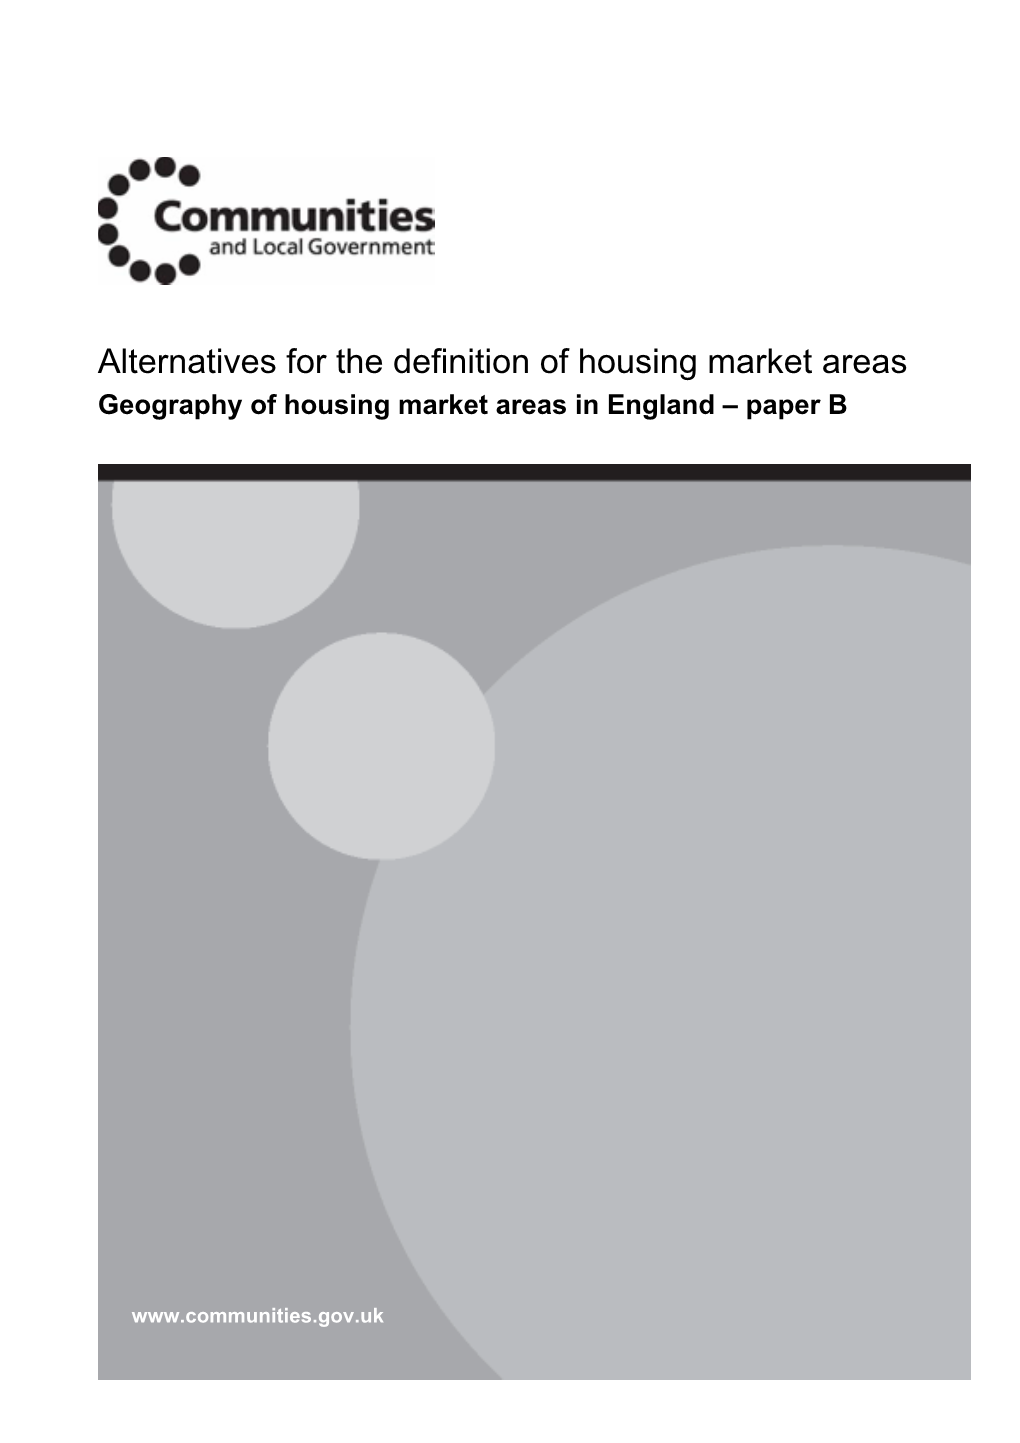 Geography of Housing Market Areas in England – Paper B